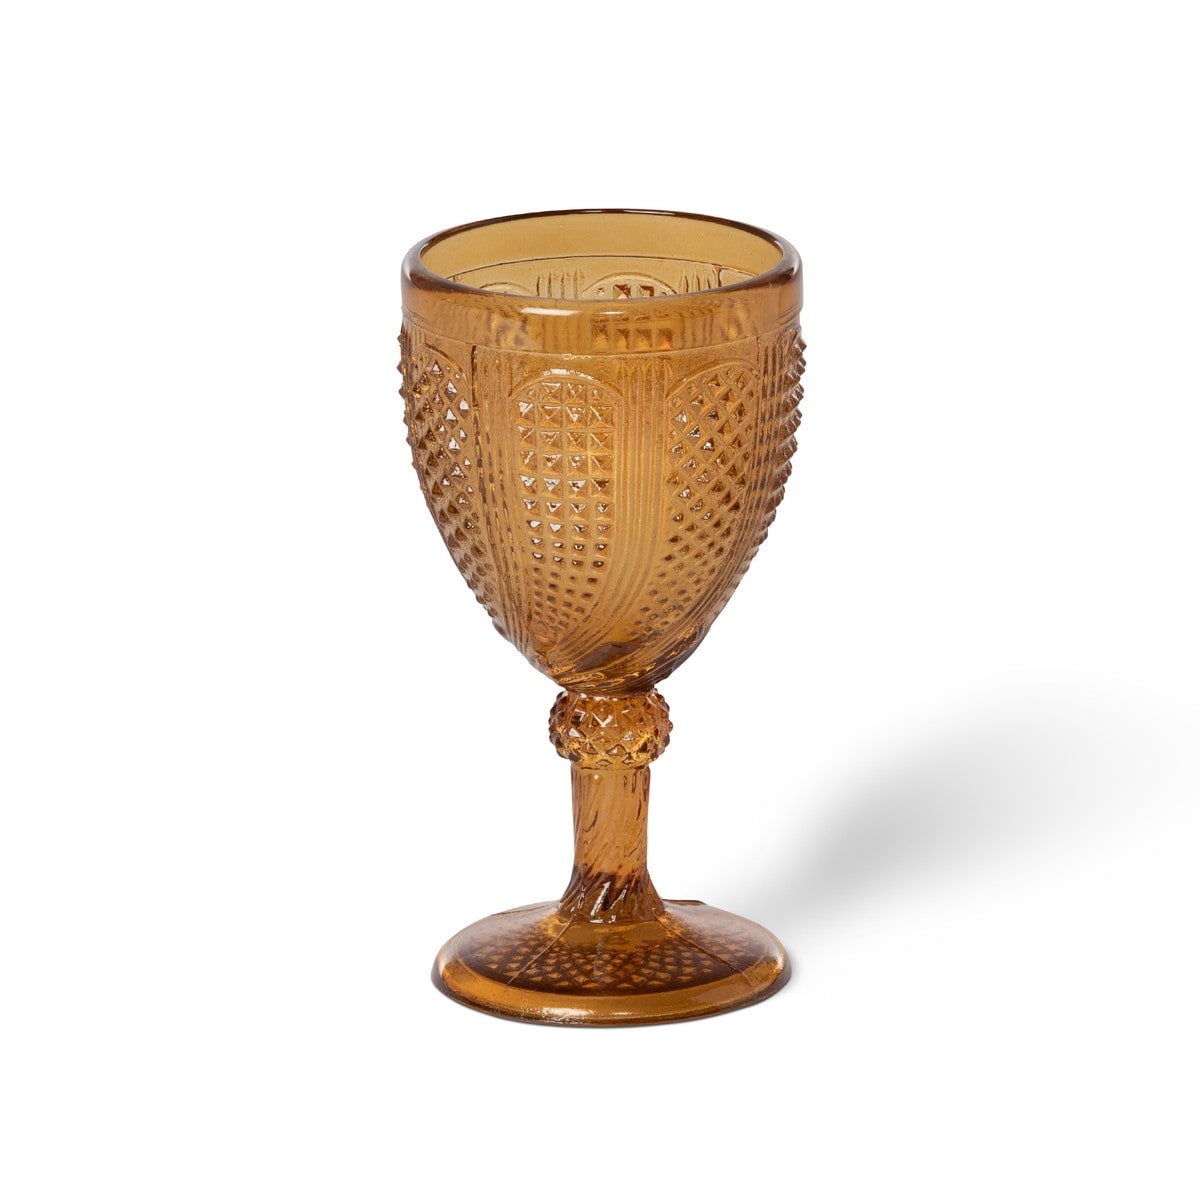 https://ak1.ostkcdn.com/images/products/is/images/direct/3914a73b1a014e69555adcf65e4b5d53298340e0/Vintage-Glass-Goblet.jpg